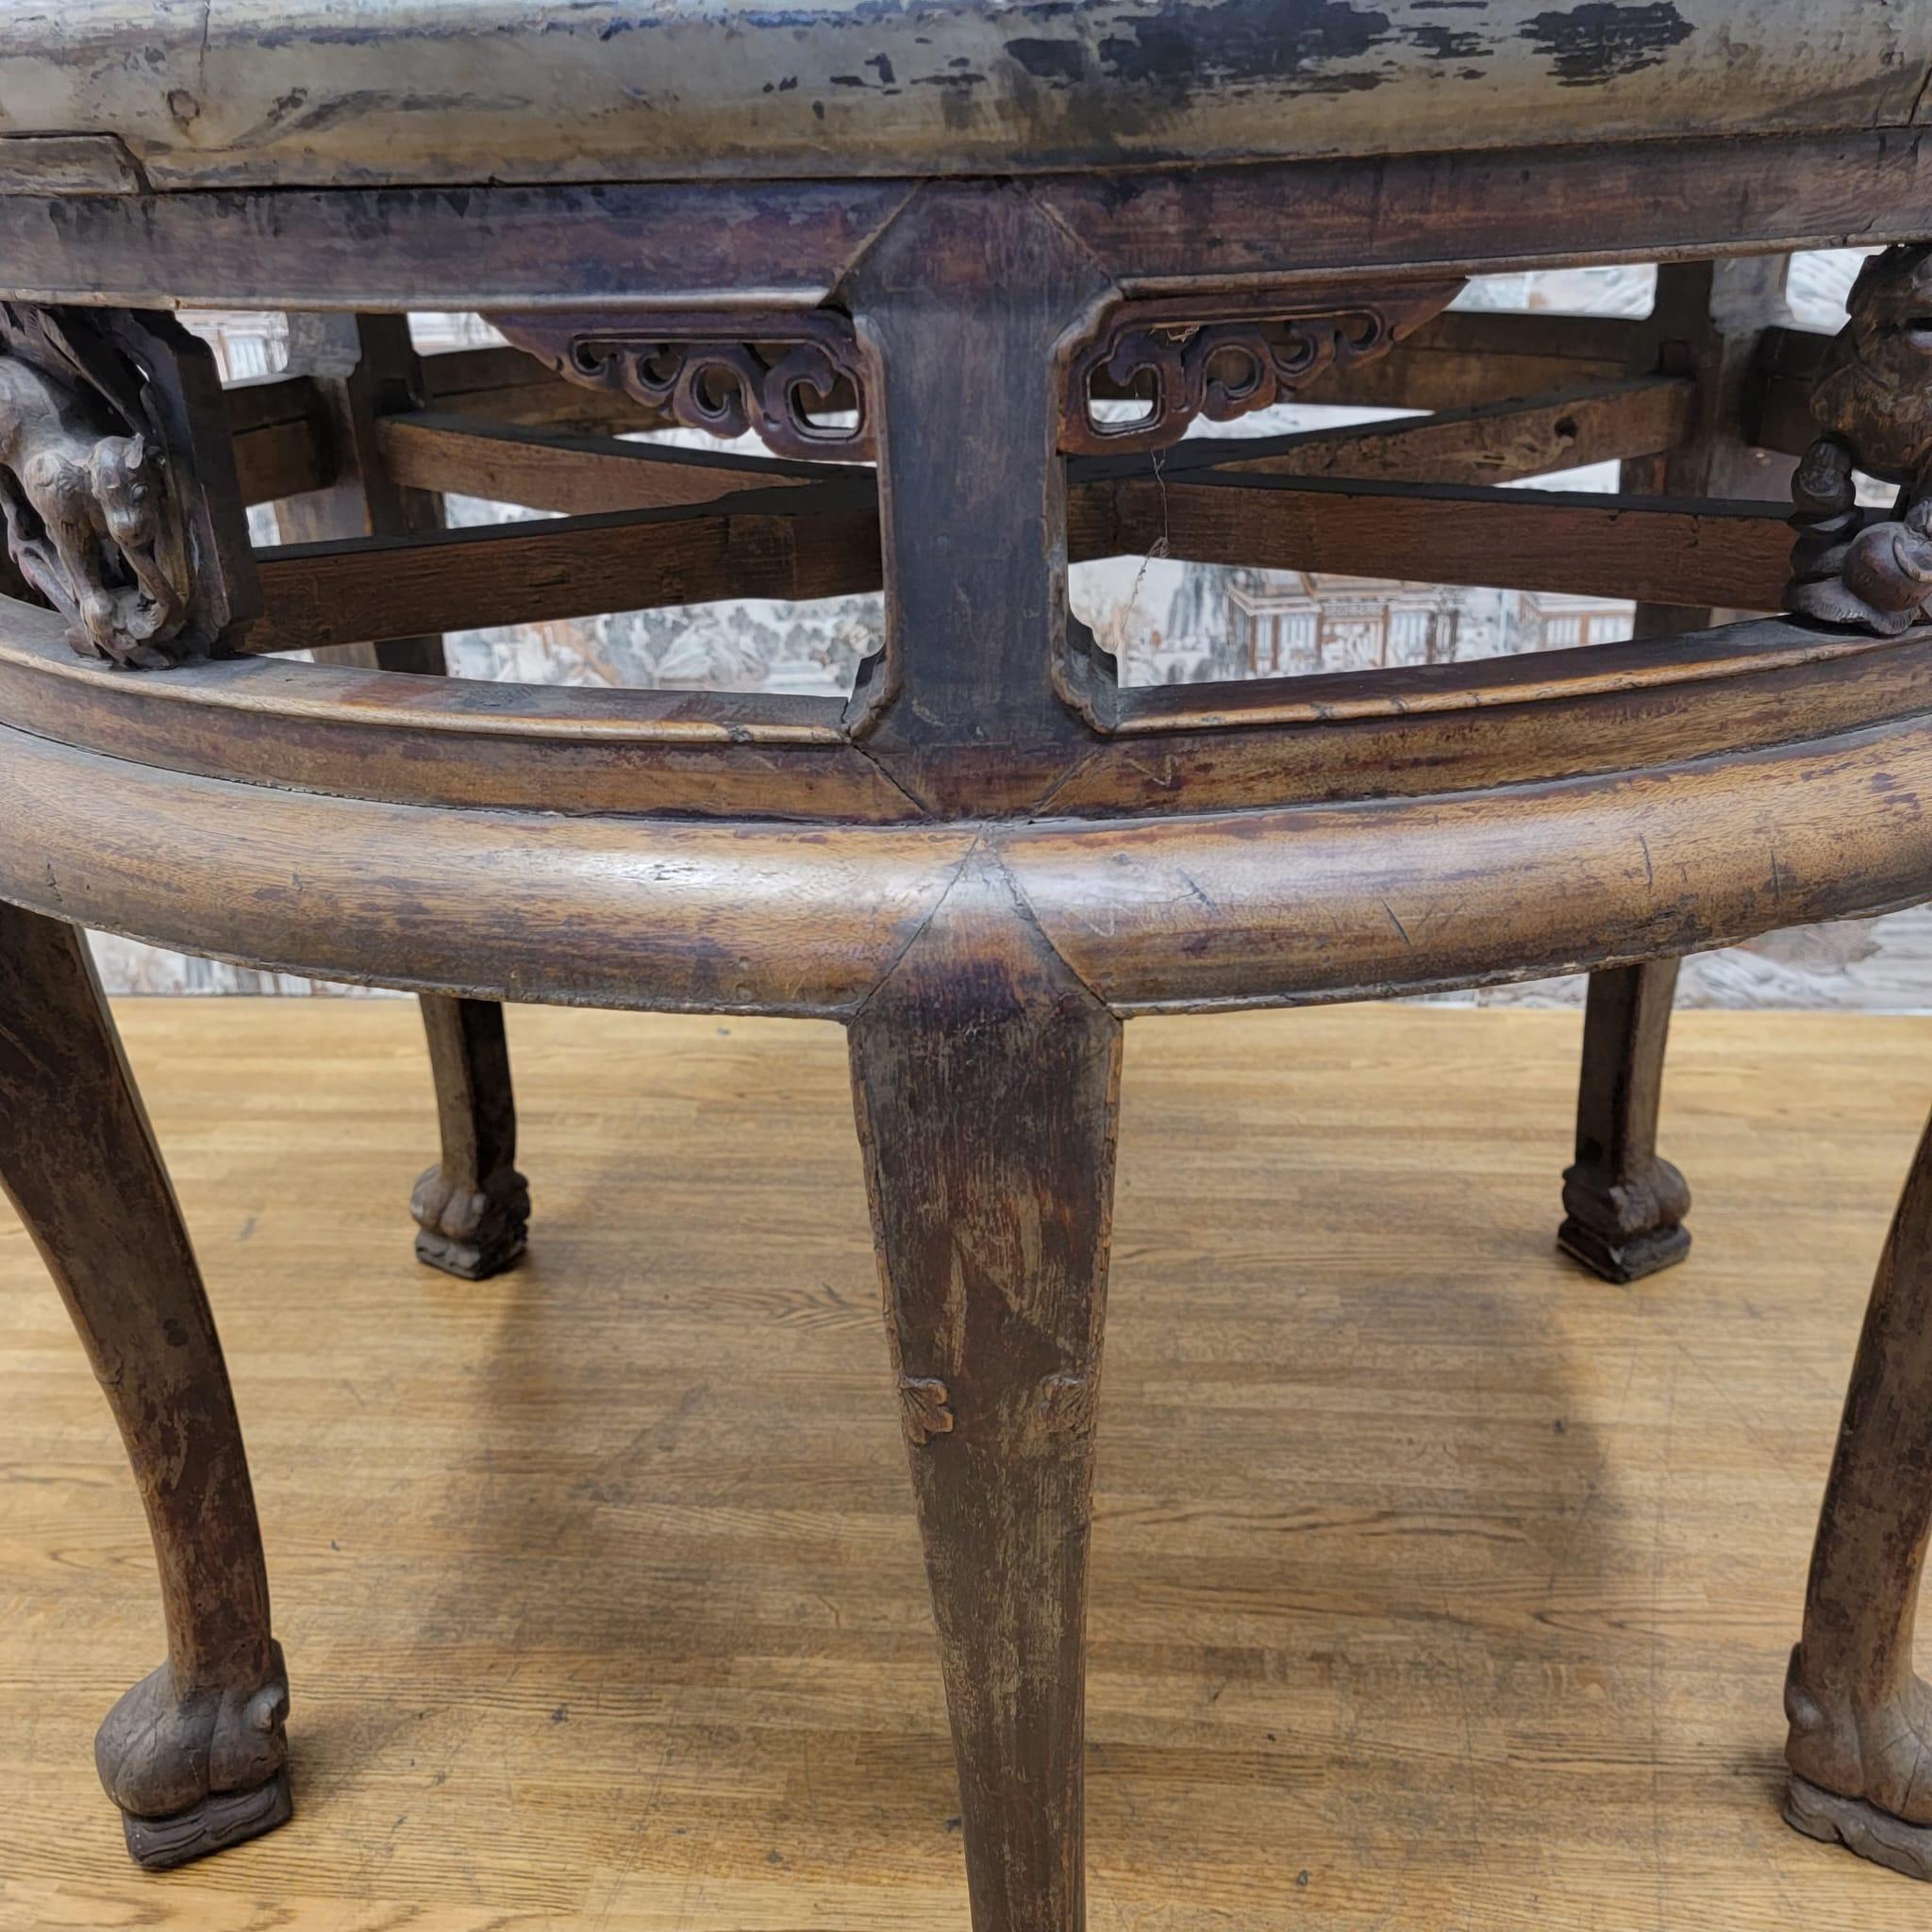 Antique Shanxi province tall elm round accent table with animal carvings on Apron

This elm, tall, round table with carved apron with animals and carvings has 6 legs. With original color and patina. Used for tea and games. Can be used in a hallway